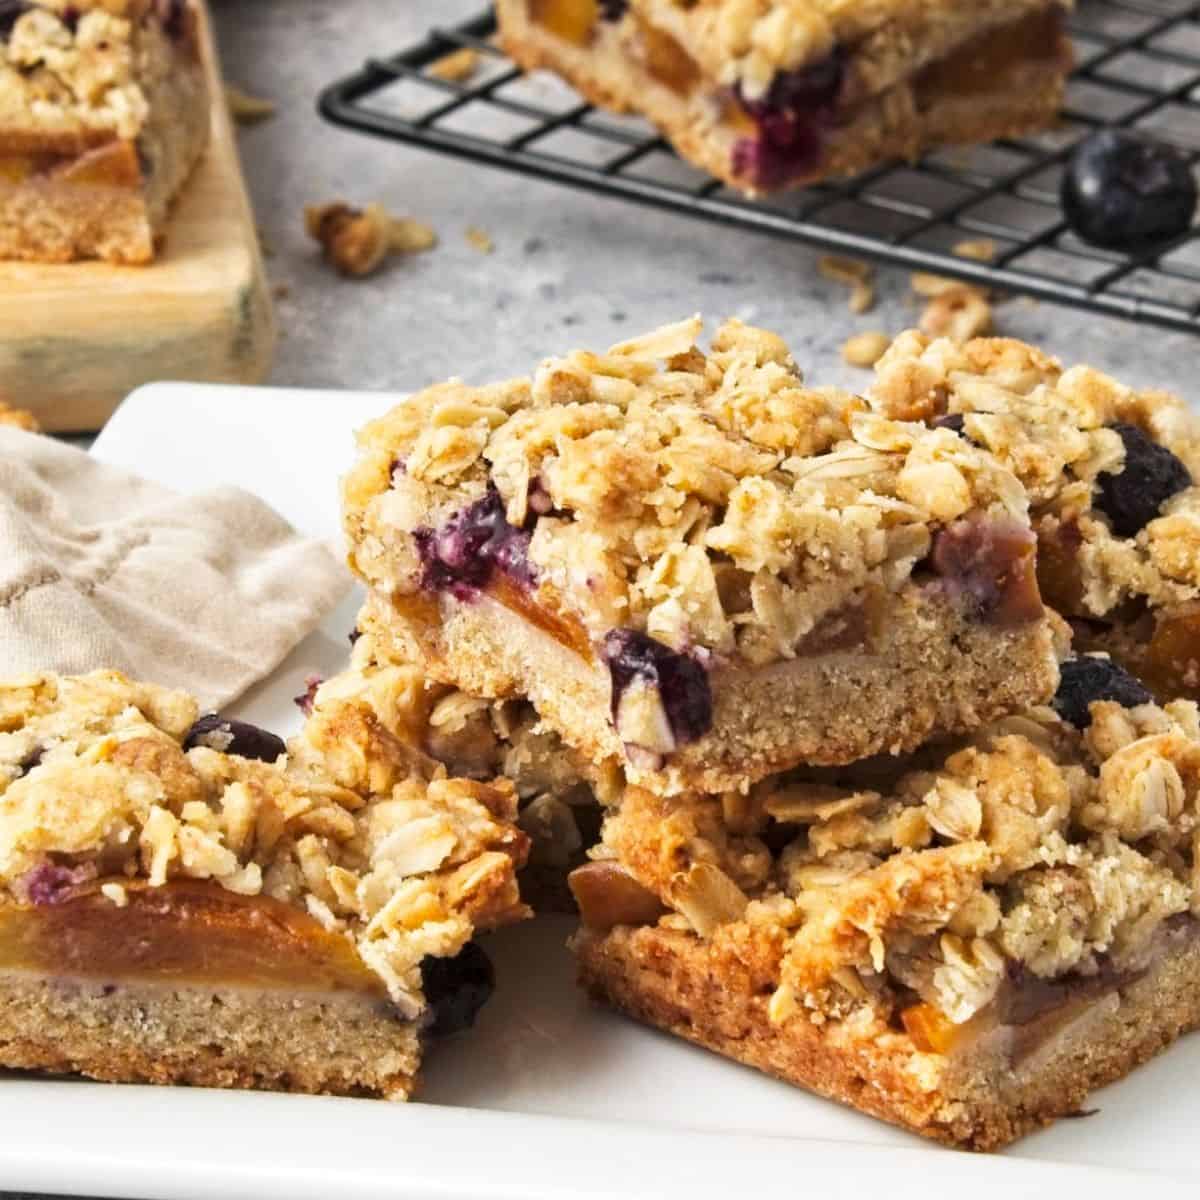 Vegan Fruit Crumble Bars are a simple layered dessert or snack recipe made with healthy ingredients including blueberries and oats.